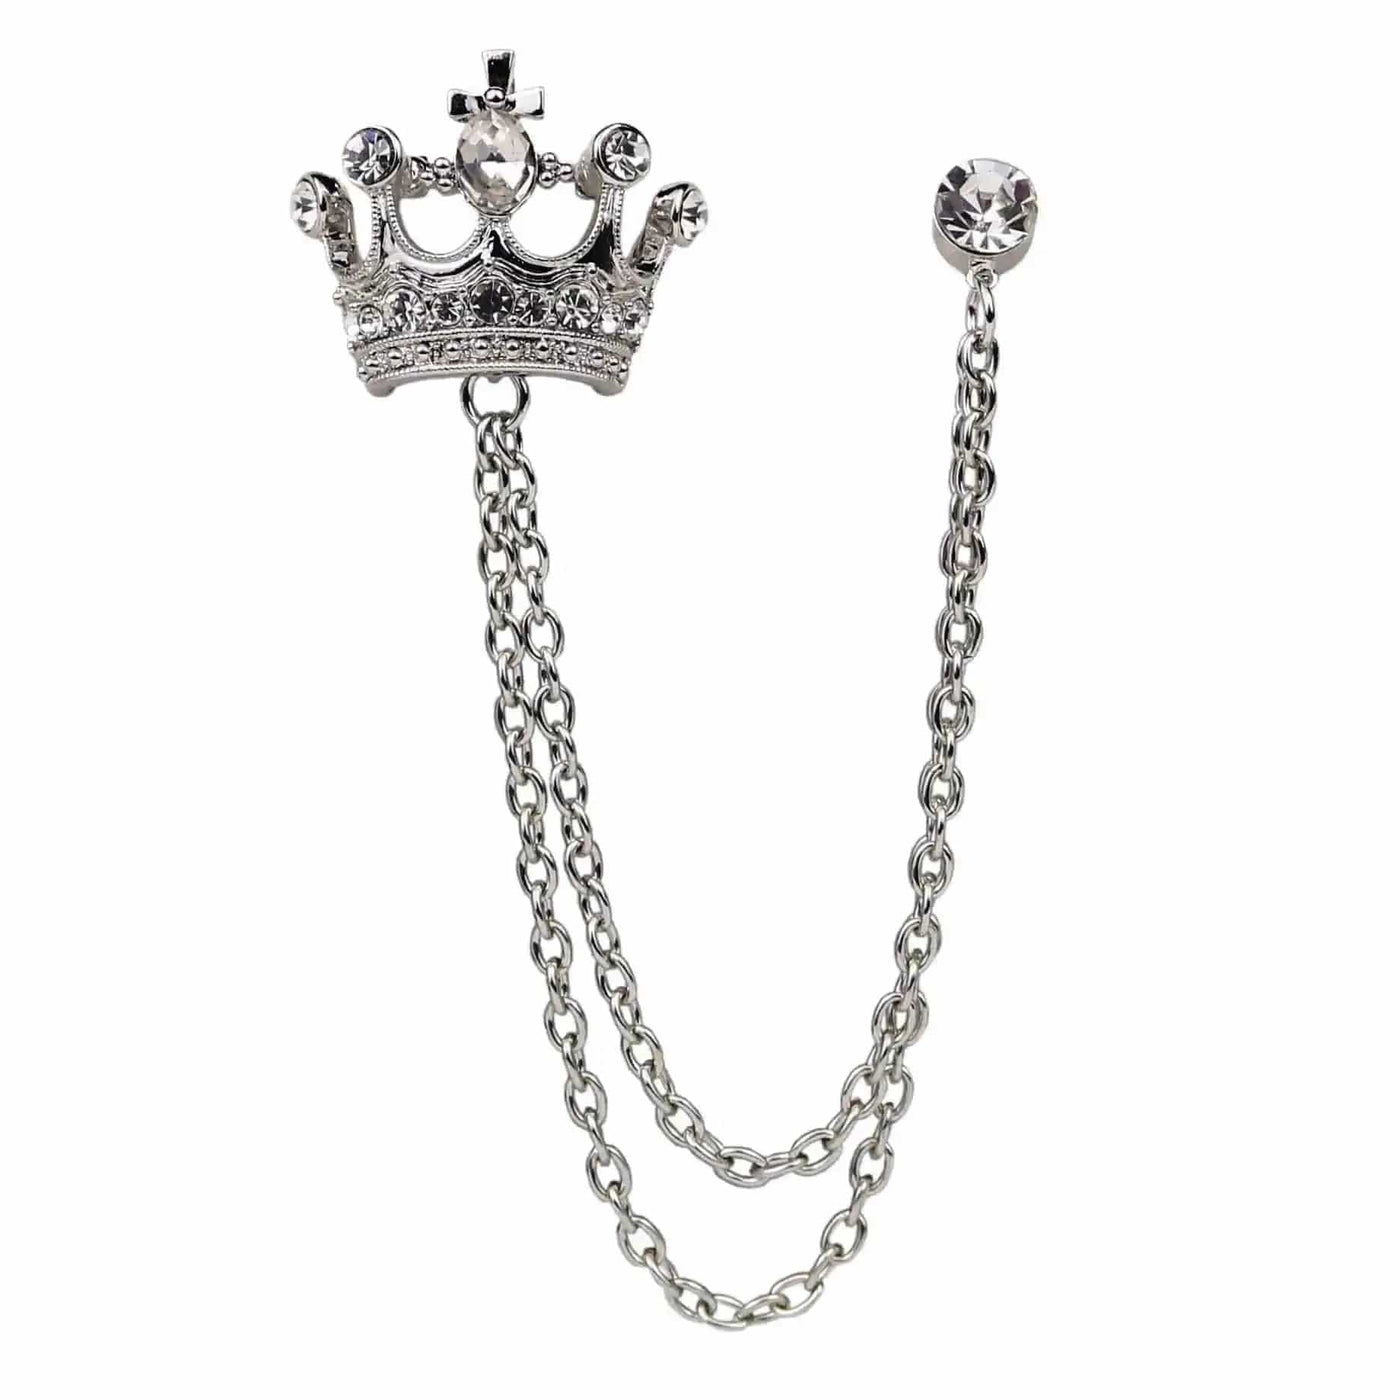 BROOCHITON Brooches Crown Suit Chain Brooch